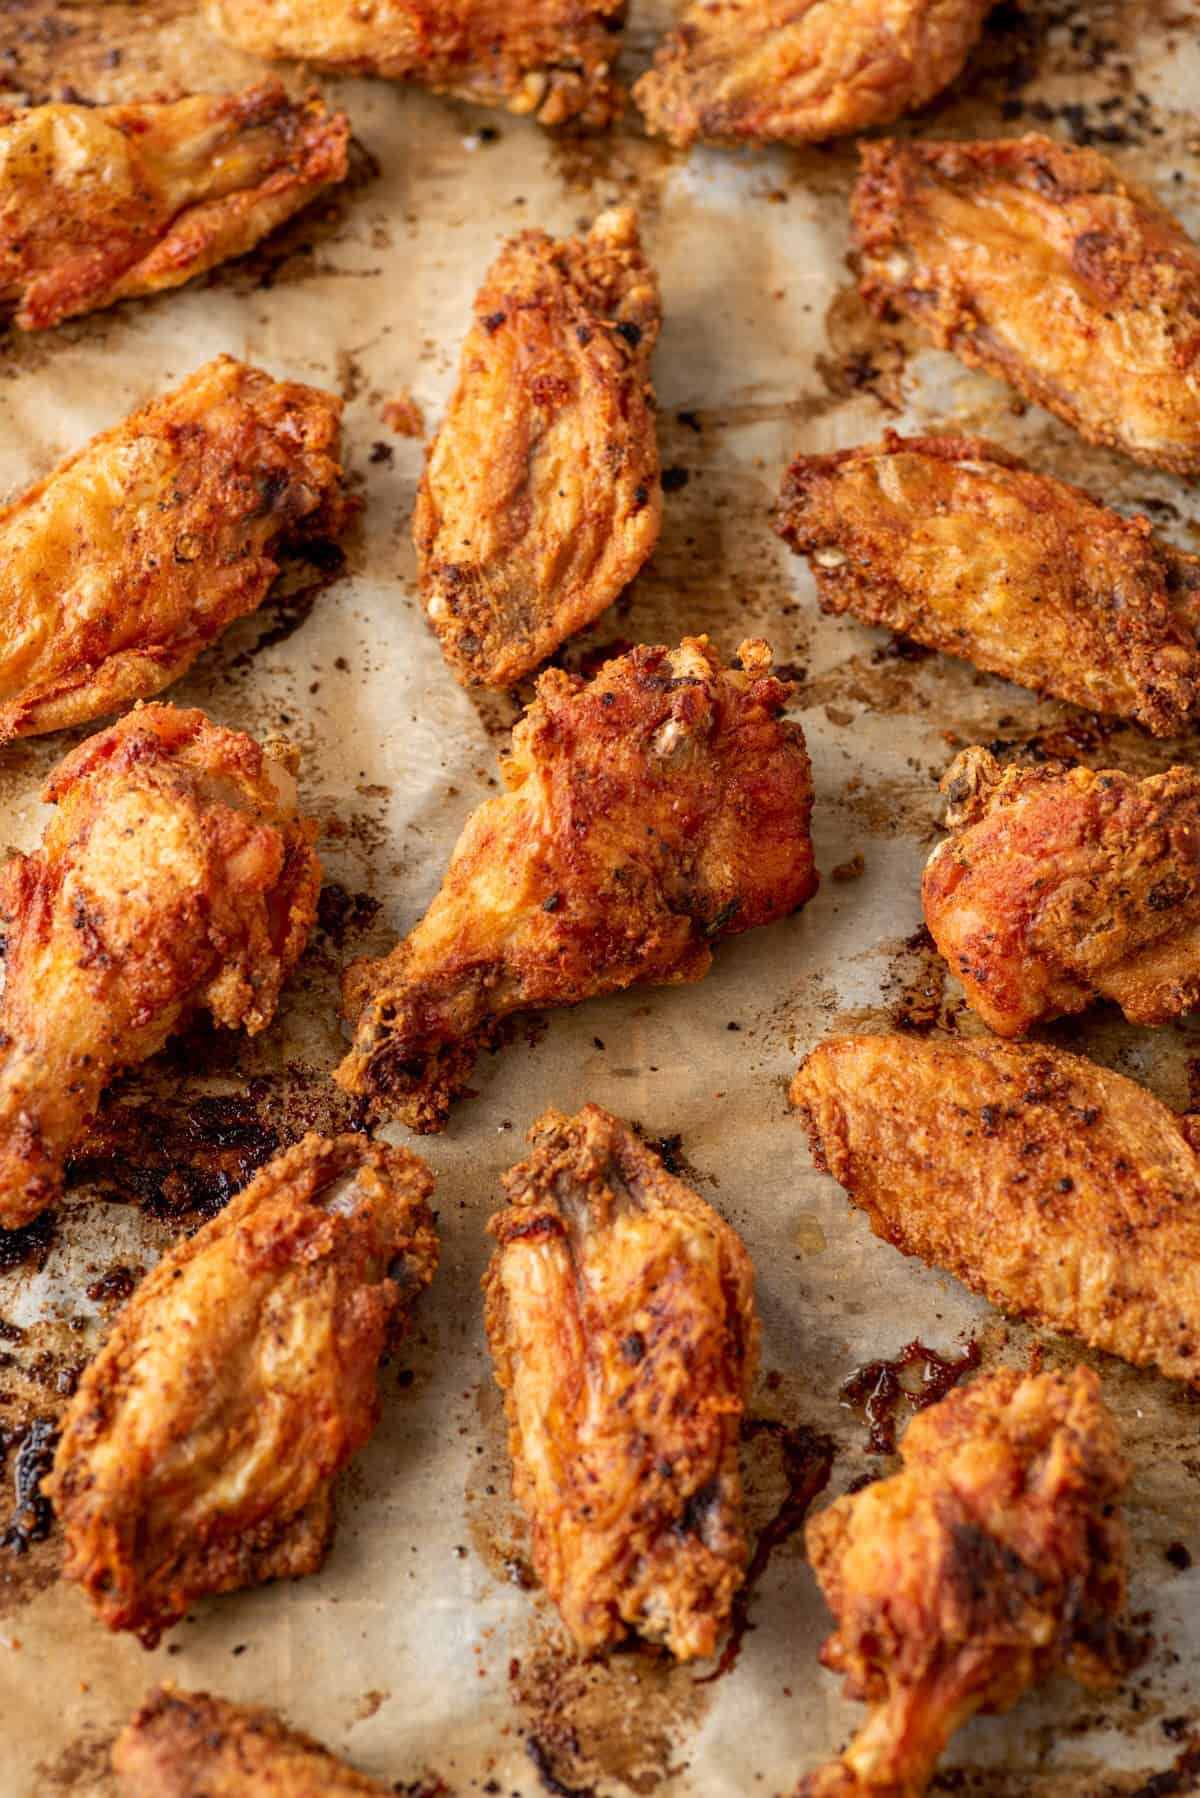 Baked chicken wings on a baking sheet covered in parchment paper